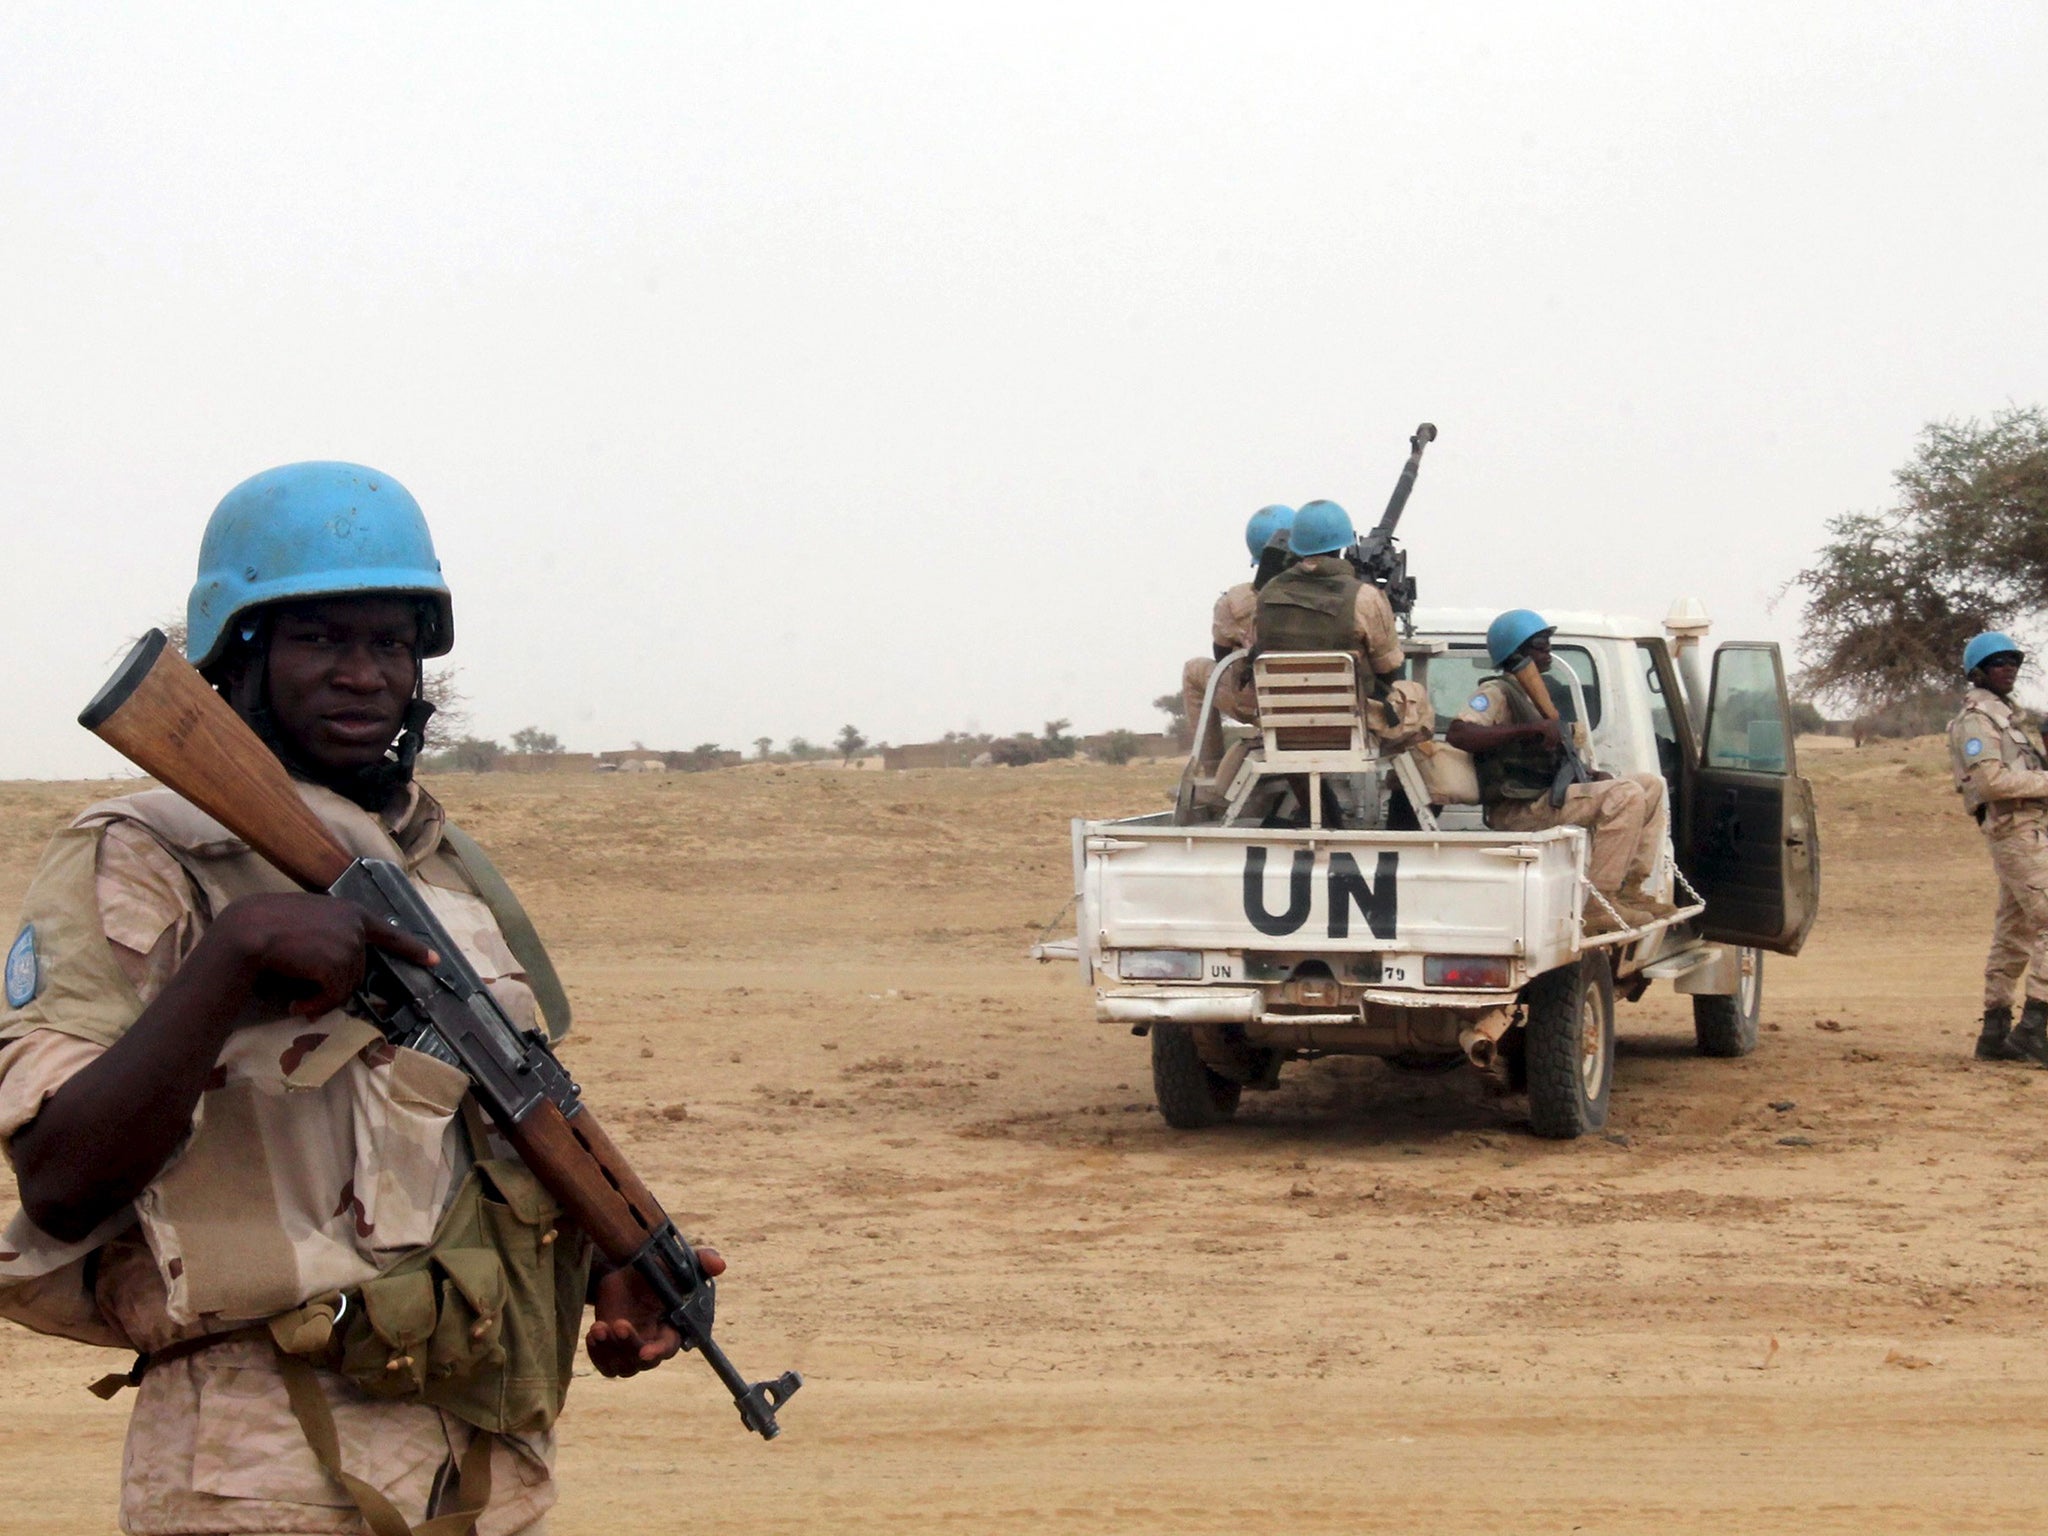 The UN confirmed that one of their peacekeepers, who are known as Blue Helmets, was killed in the attack